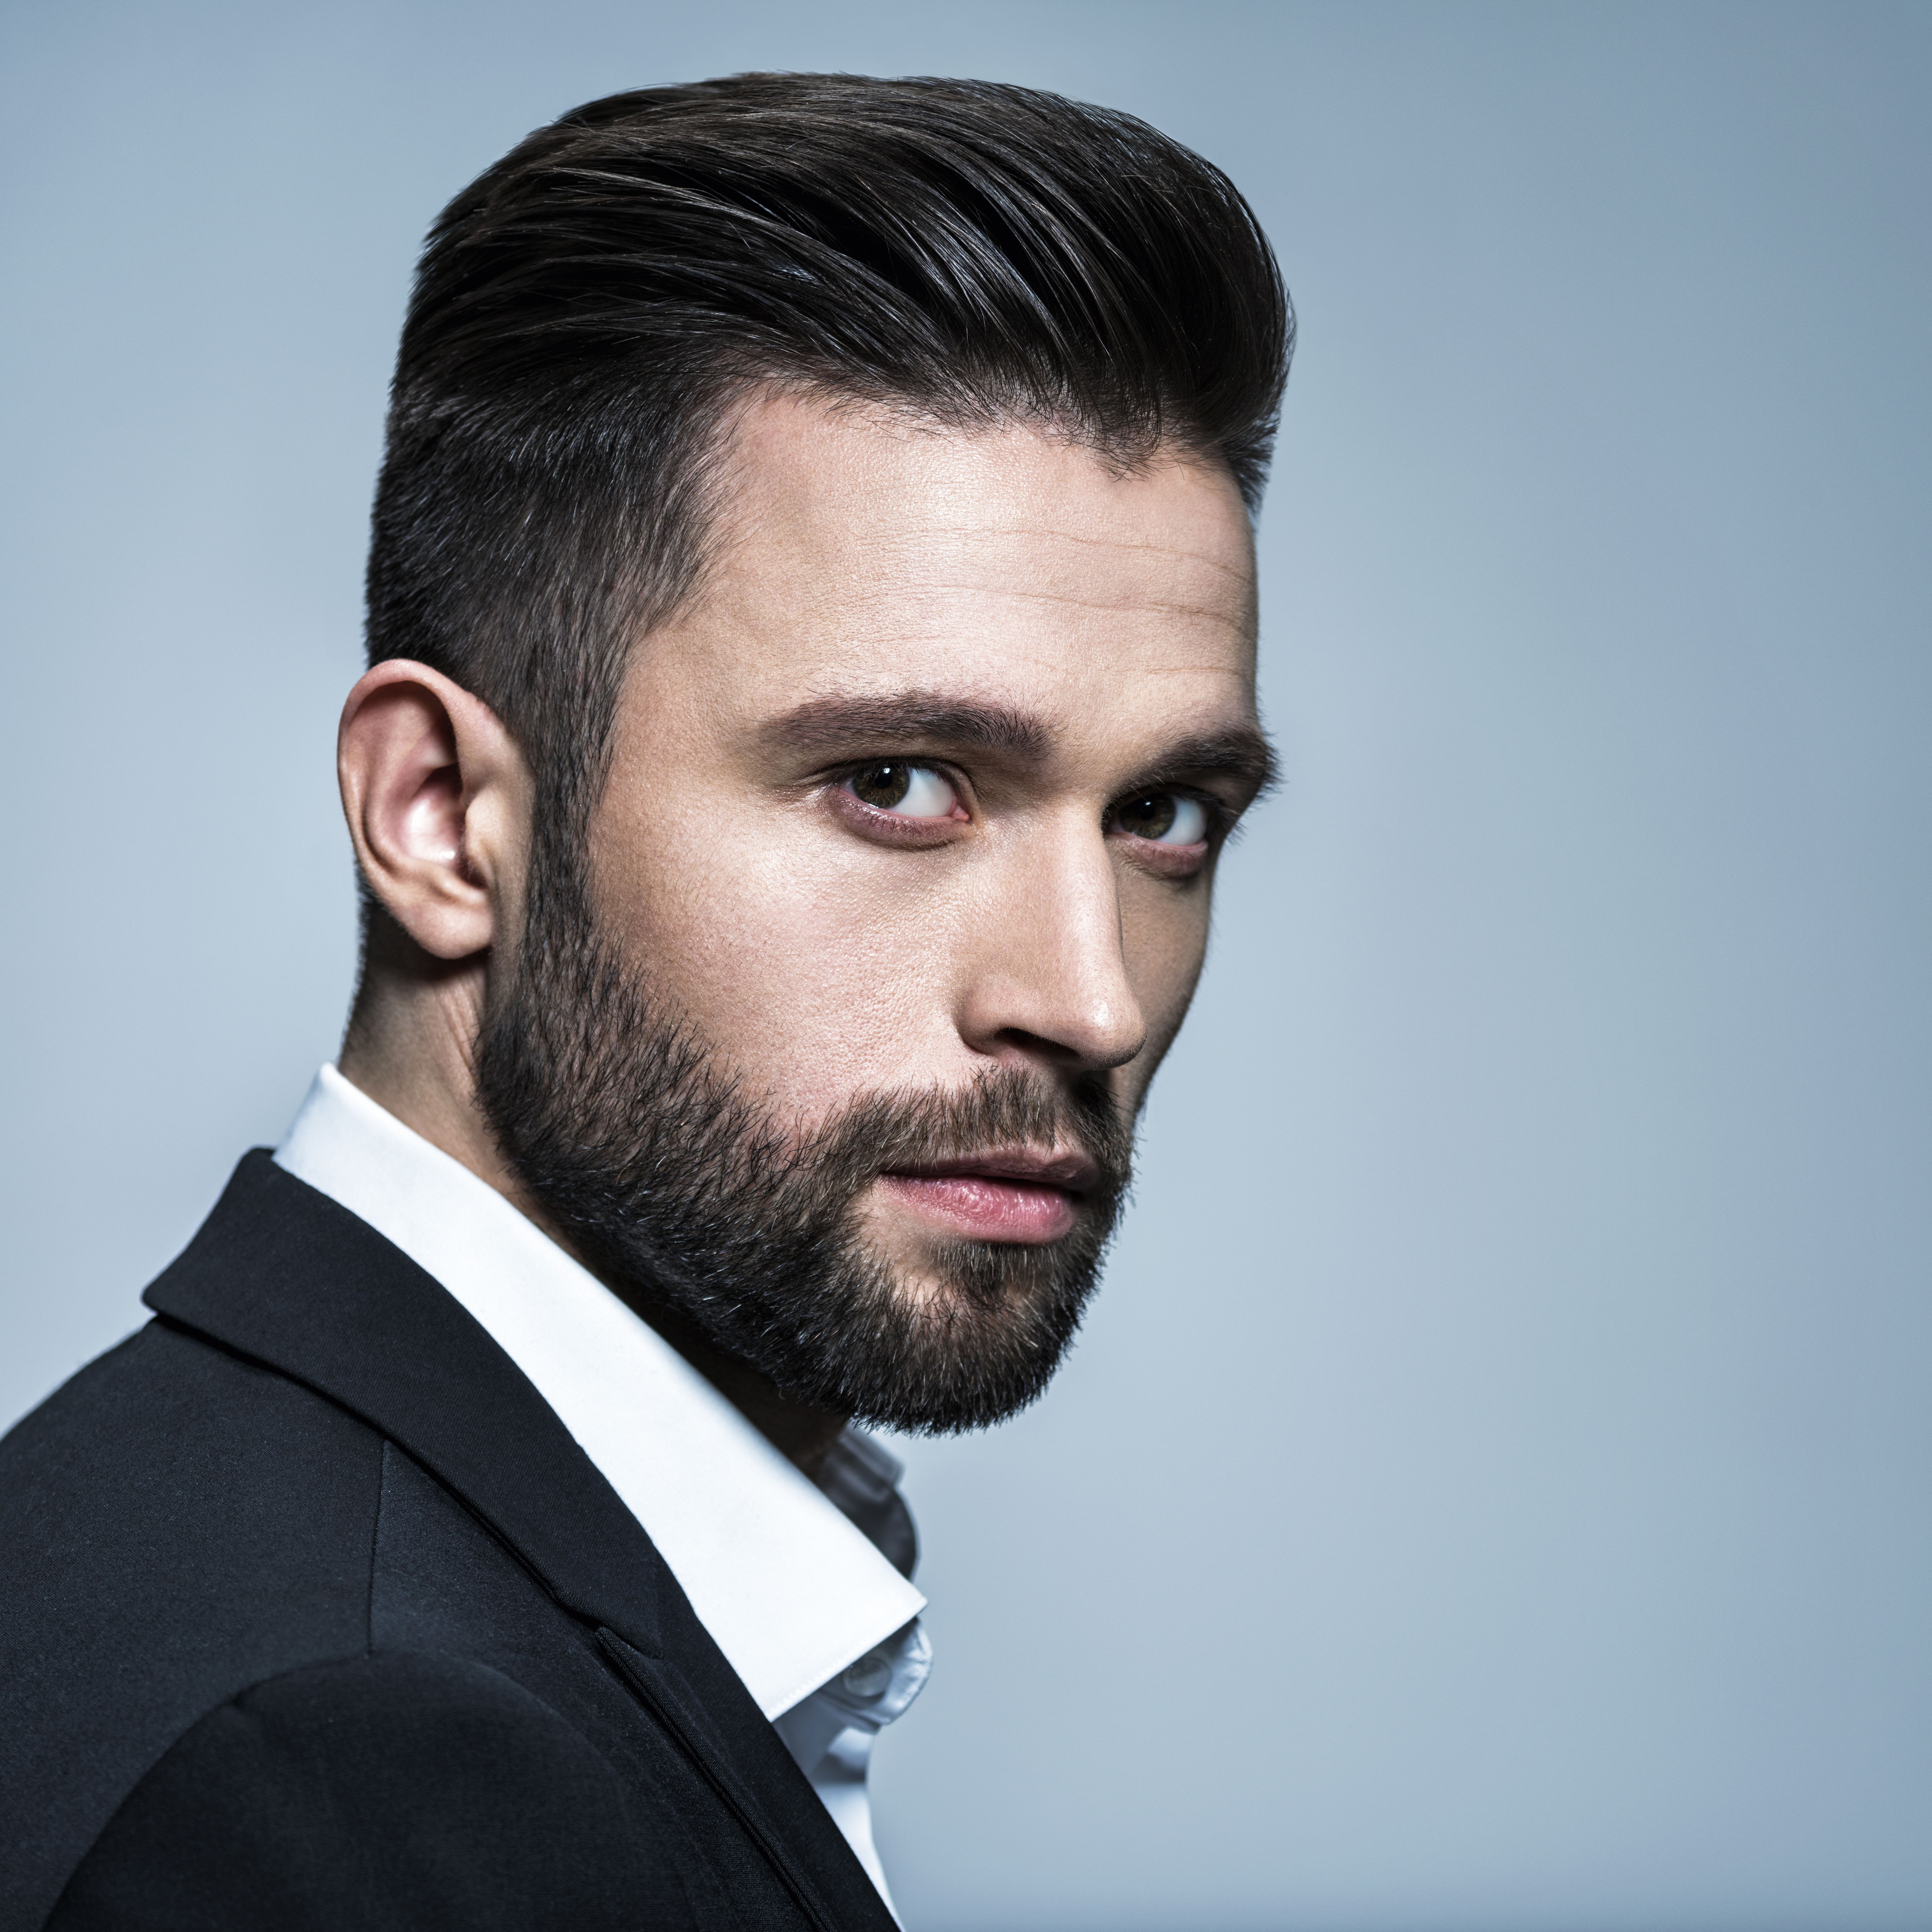 The Best Men's Haircuts For Your Face Shape in 2023